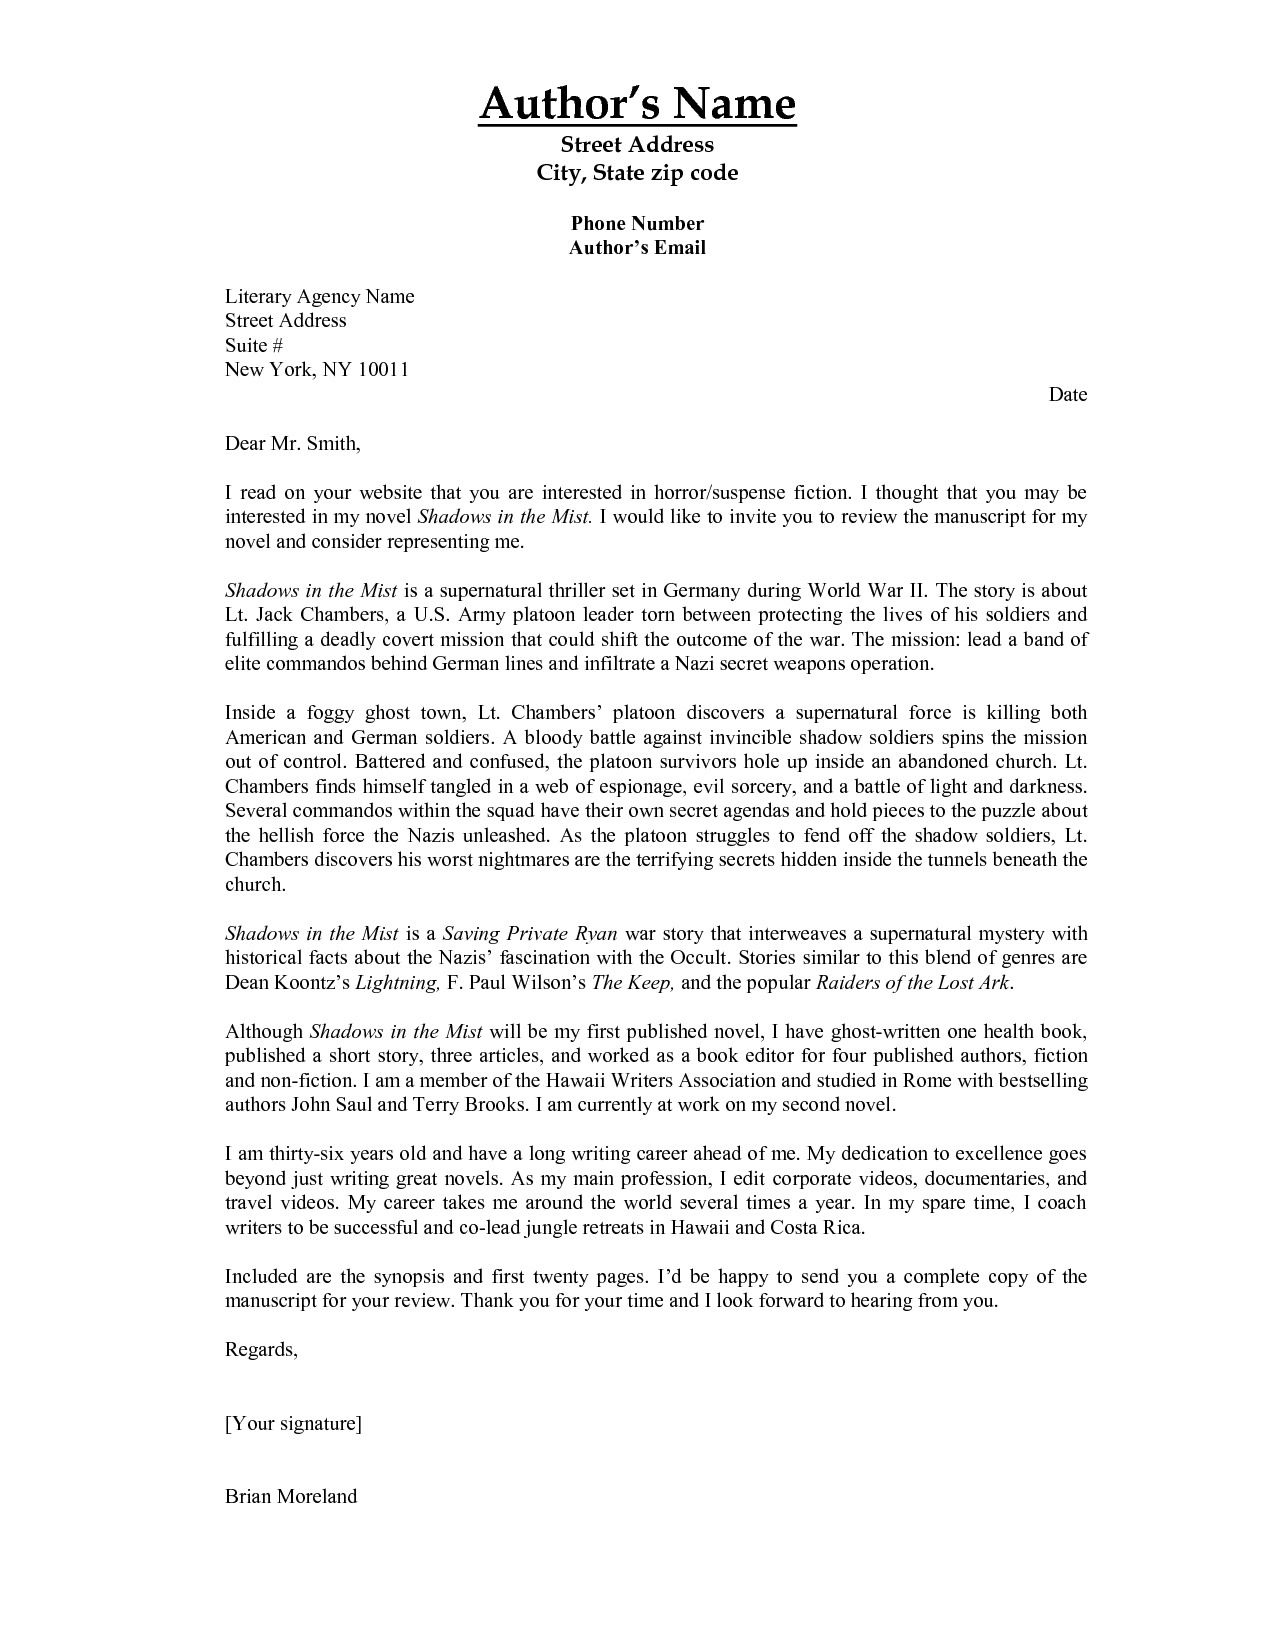 Query Letter Template Recommendation Letter Template pertaining to dimensions 1275 X 1650